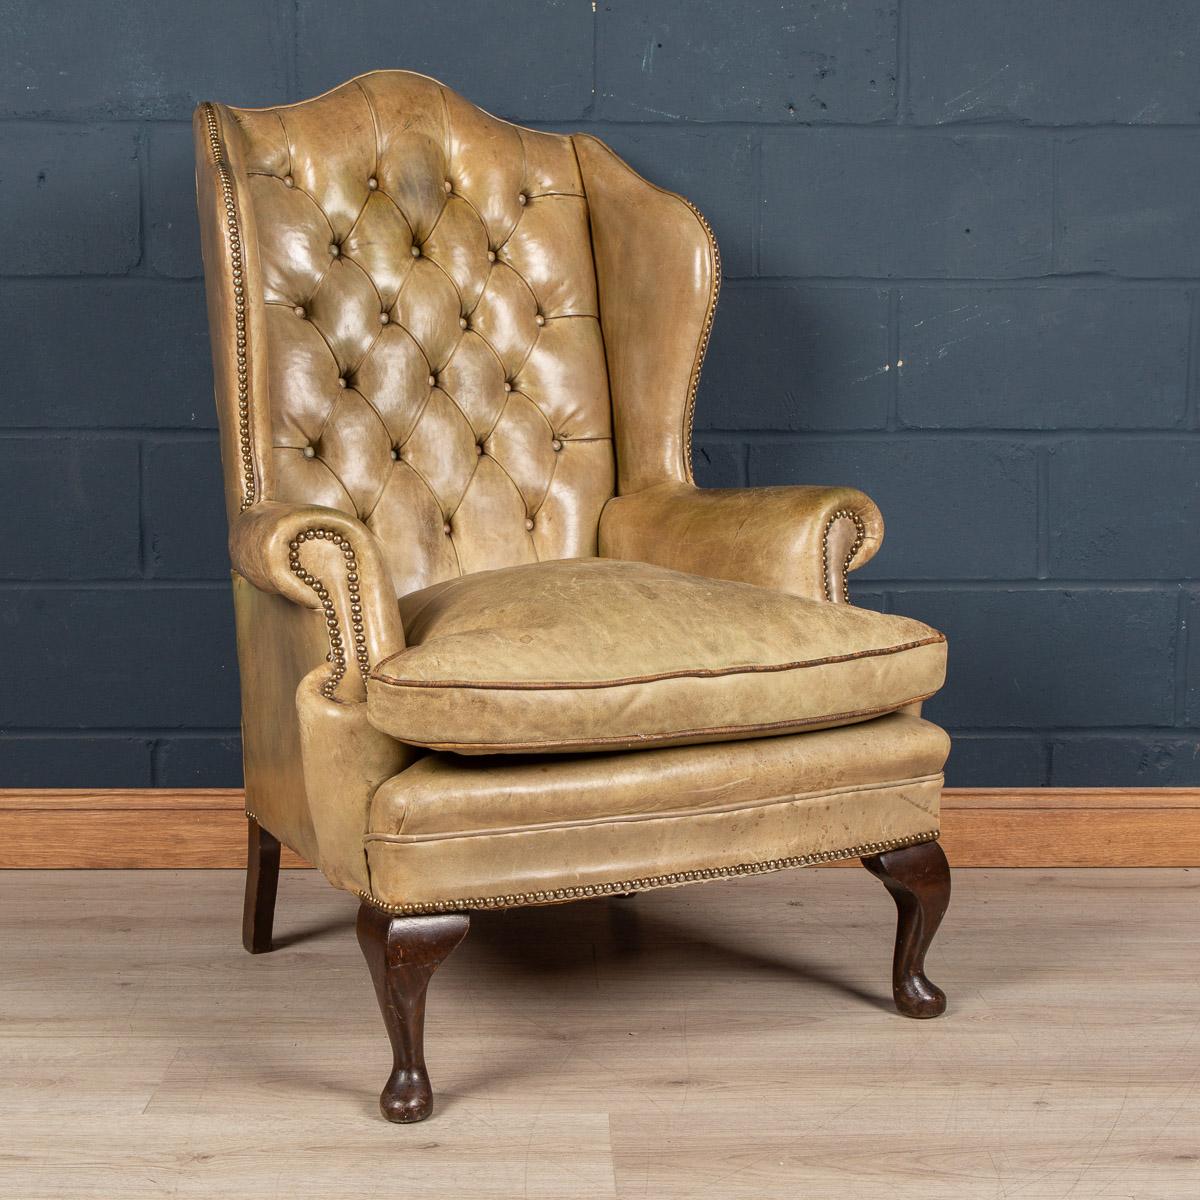 A lovely English wing back leather chair with button down backrest from the middle of the last century, the hand dyed leather giving it a great patina and colour.

Condition
In good condition - wear and tear consistent with age. Some crazing to